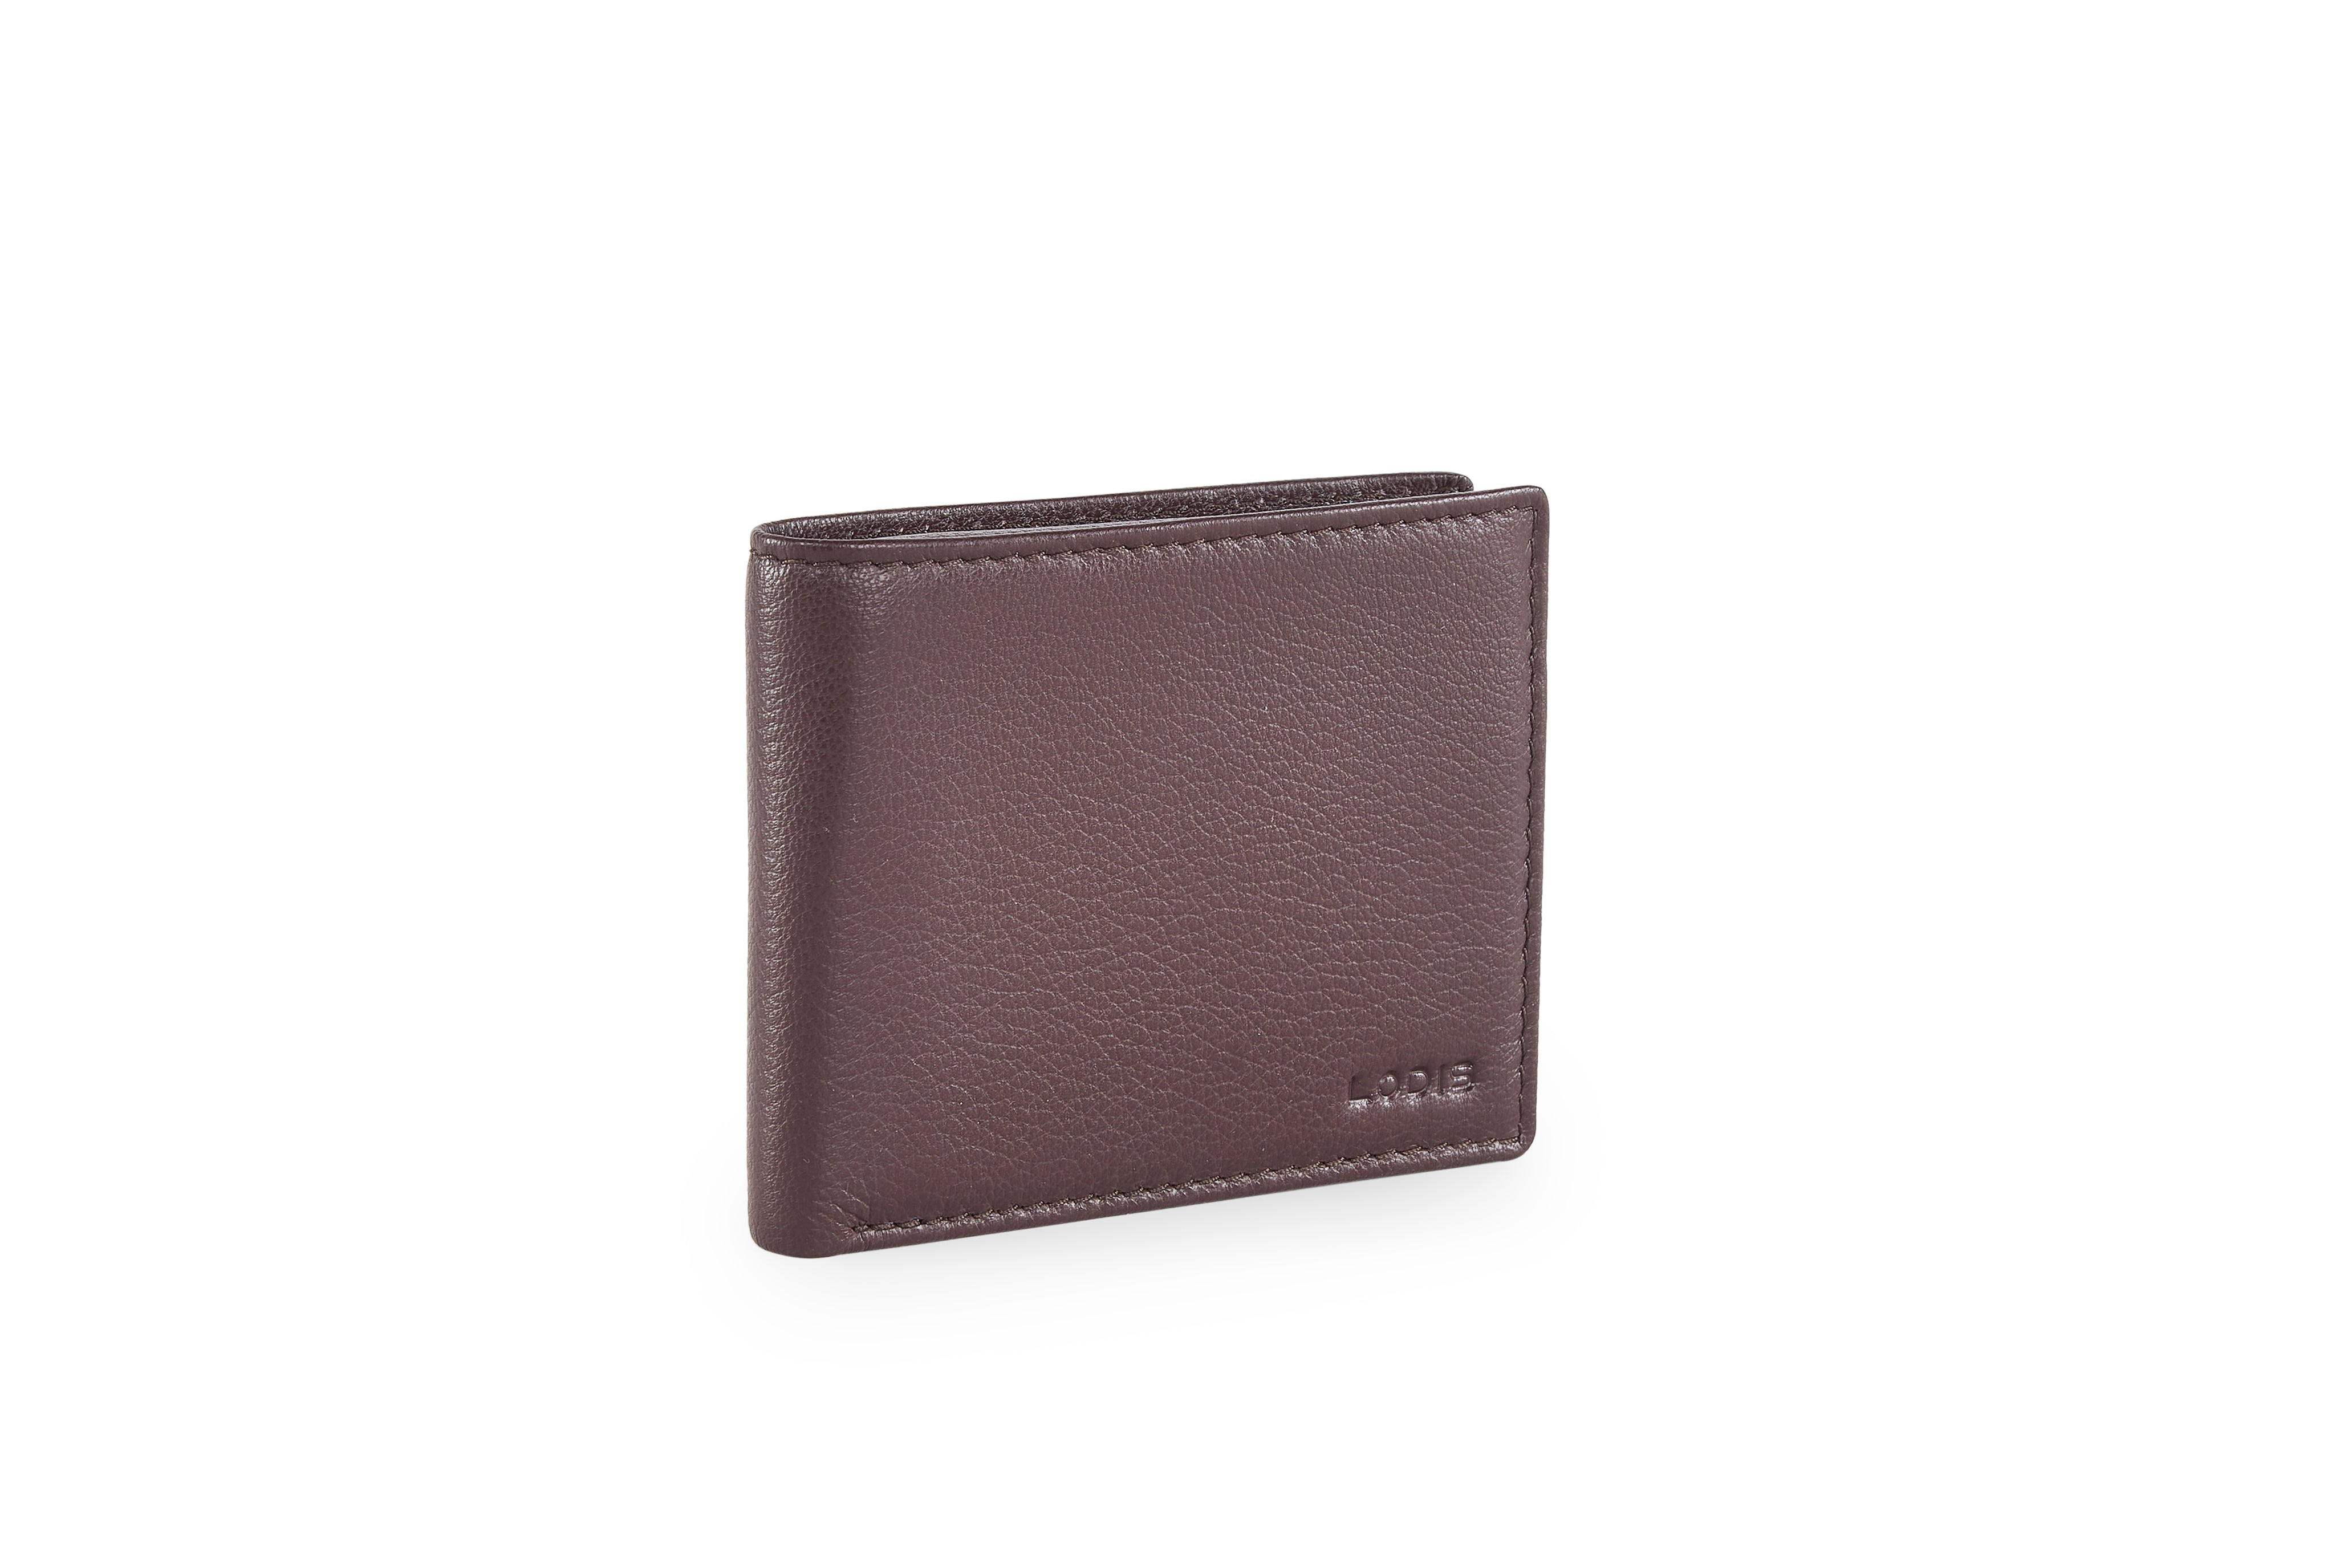 Buy Lodis Leather Passcase Wallet with Card Case | Lodis